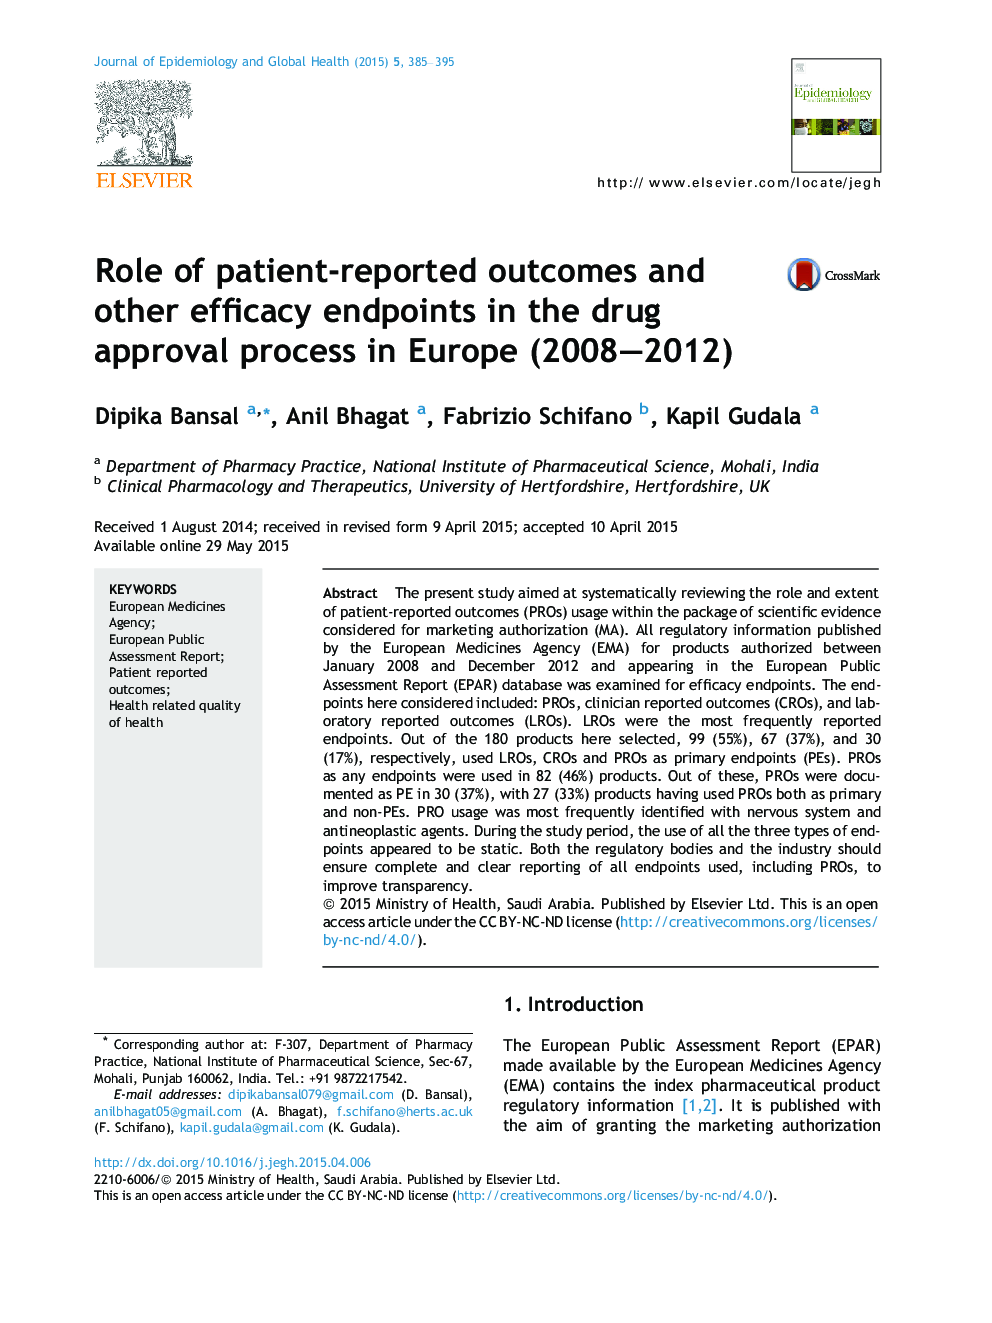 Role of patient-reported outcomes and other efficacy endpoints in the drug approval process in Europe (2008–2012)